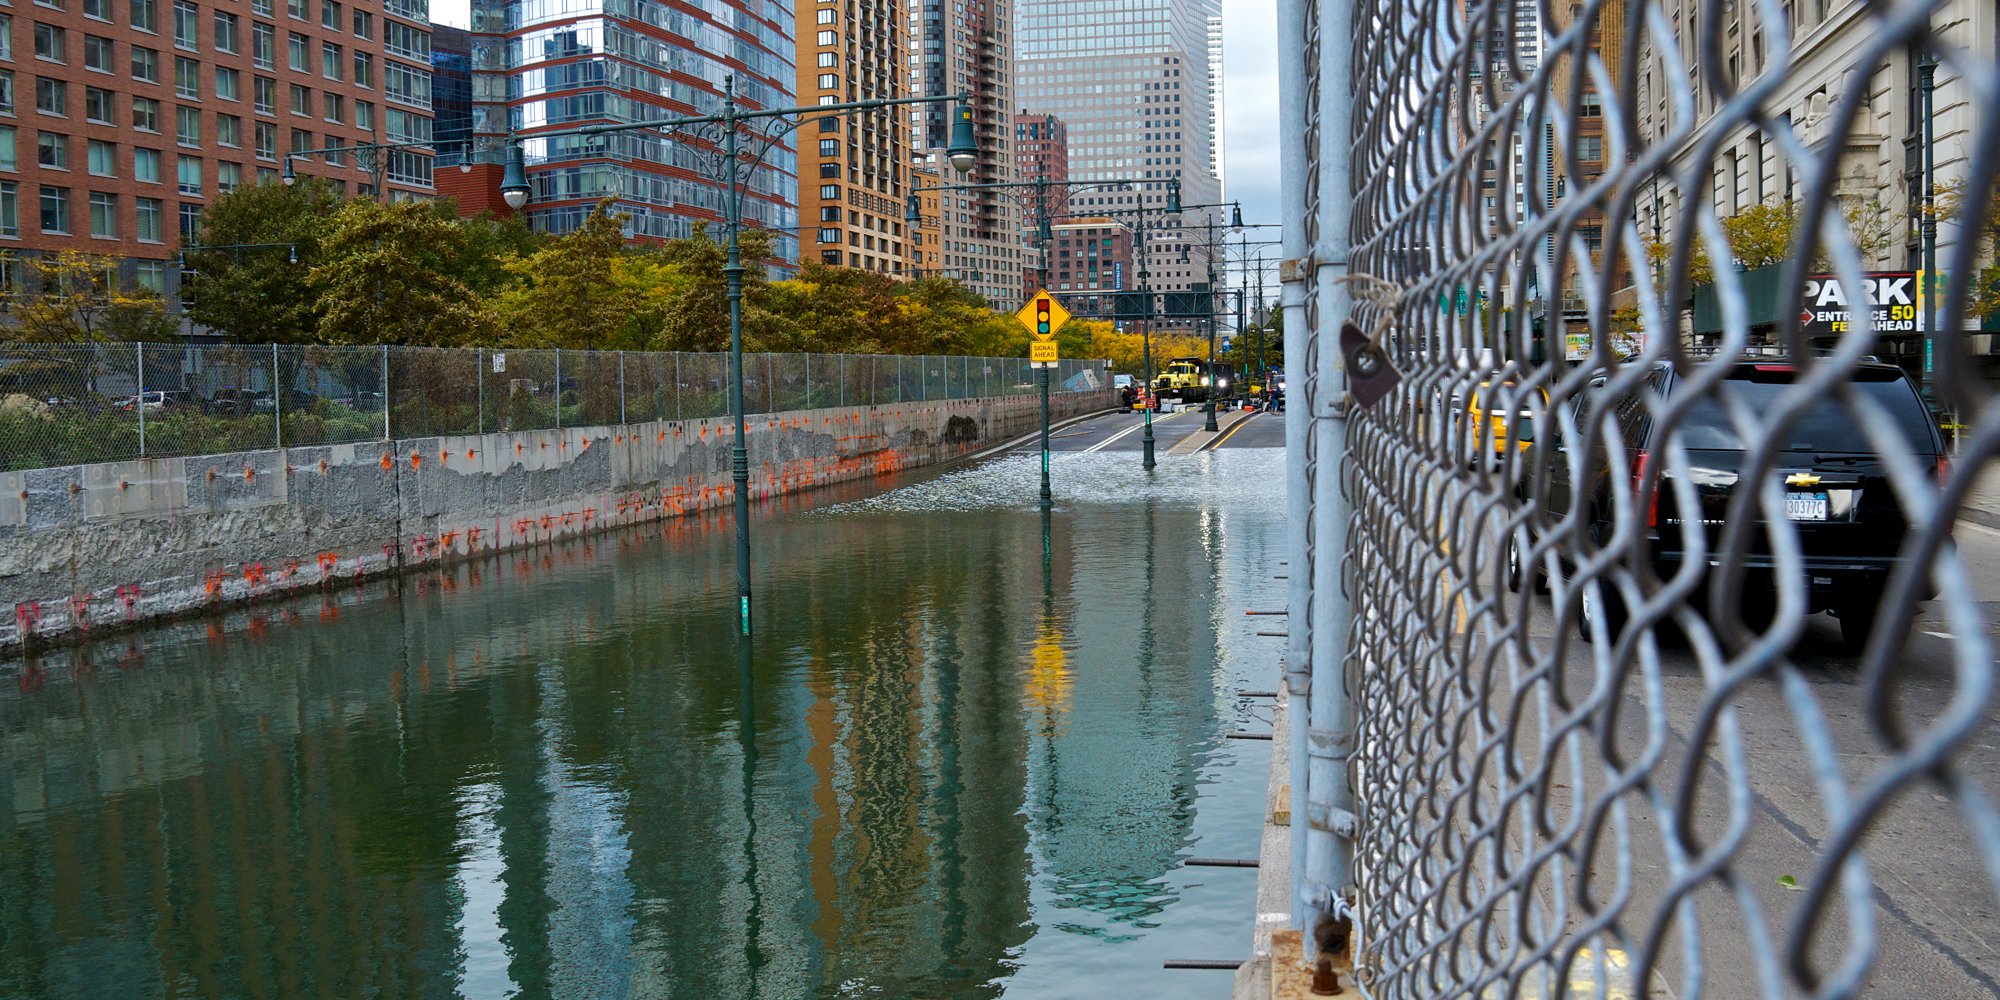 iStock/JayLazarin: New York City’s Battery Park Underpass in the aftermath of Hurricane Sandy